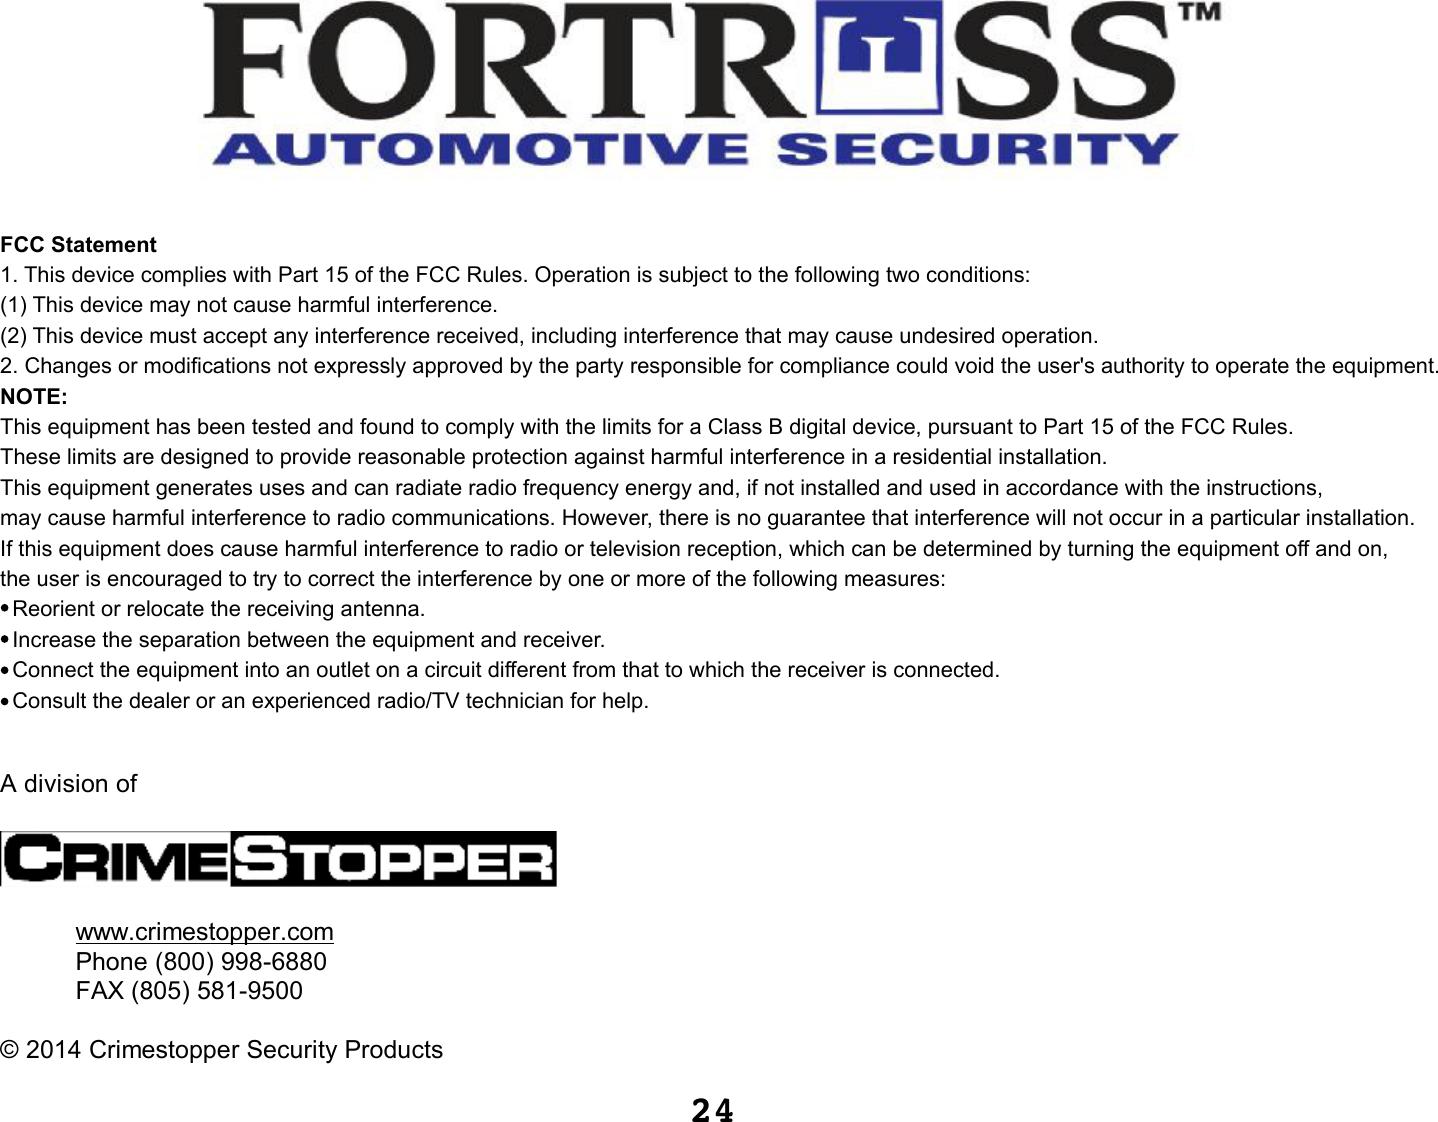 24A division ofwww.crimestopper.comPhone (800) 998-6880FAX (805) 581-9500©2014 Crimestopper Security ProductsFCC Statement1. This device complies with Part 15 of the FCC Rules. Operation is subject to the following two conditions:(1) This device may not cause harmful interference.(2) This device must accept any interference received, including interference that may cause undesired operation.2. Changes or modifications not expressly approved by the party responsible for compliance could void the user&apos;s authority to operate the equipment.NOTE: This equipment has been tested and found to comply with the limits for a Class B digital device, pursuant to Part 15 of the FCC Rules. These limits are designed to provide reasonable protection against harmful interference in a residential installation.This equipment generates uses and can radiate radio frequency energy and, if not installed and used in accordance with the instructions, may cause harmful interference to radio communications. However, there is no guarantee that interference will not occur in a particular installation. If this equipment does cause harmful interference to radio or television reception, which can be determined by turning the equipment off and on, the user is encouraged to try to correct the interference by one or more of the following measures:  Reorient or relocate the receiving antenna.  Increase the separation between the equipment and receiver.  Connect the equipment into an outlet on a circuit different from that to which the receiver is connected.   Consult the dealer or an experienced radio/TV technician for help.